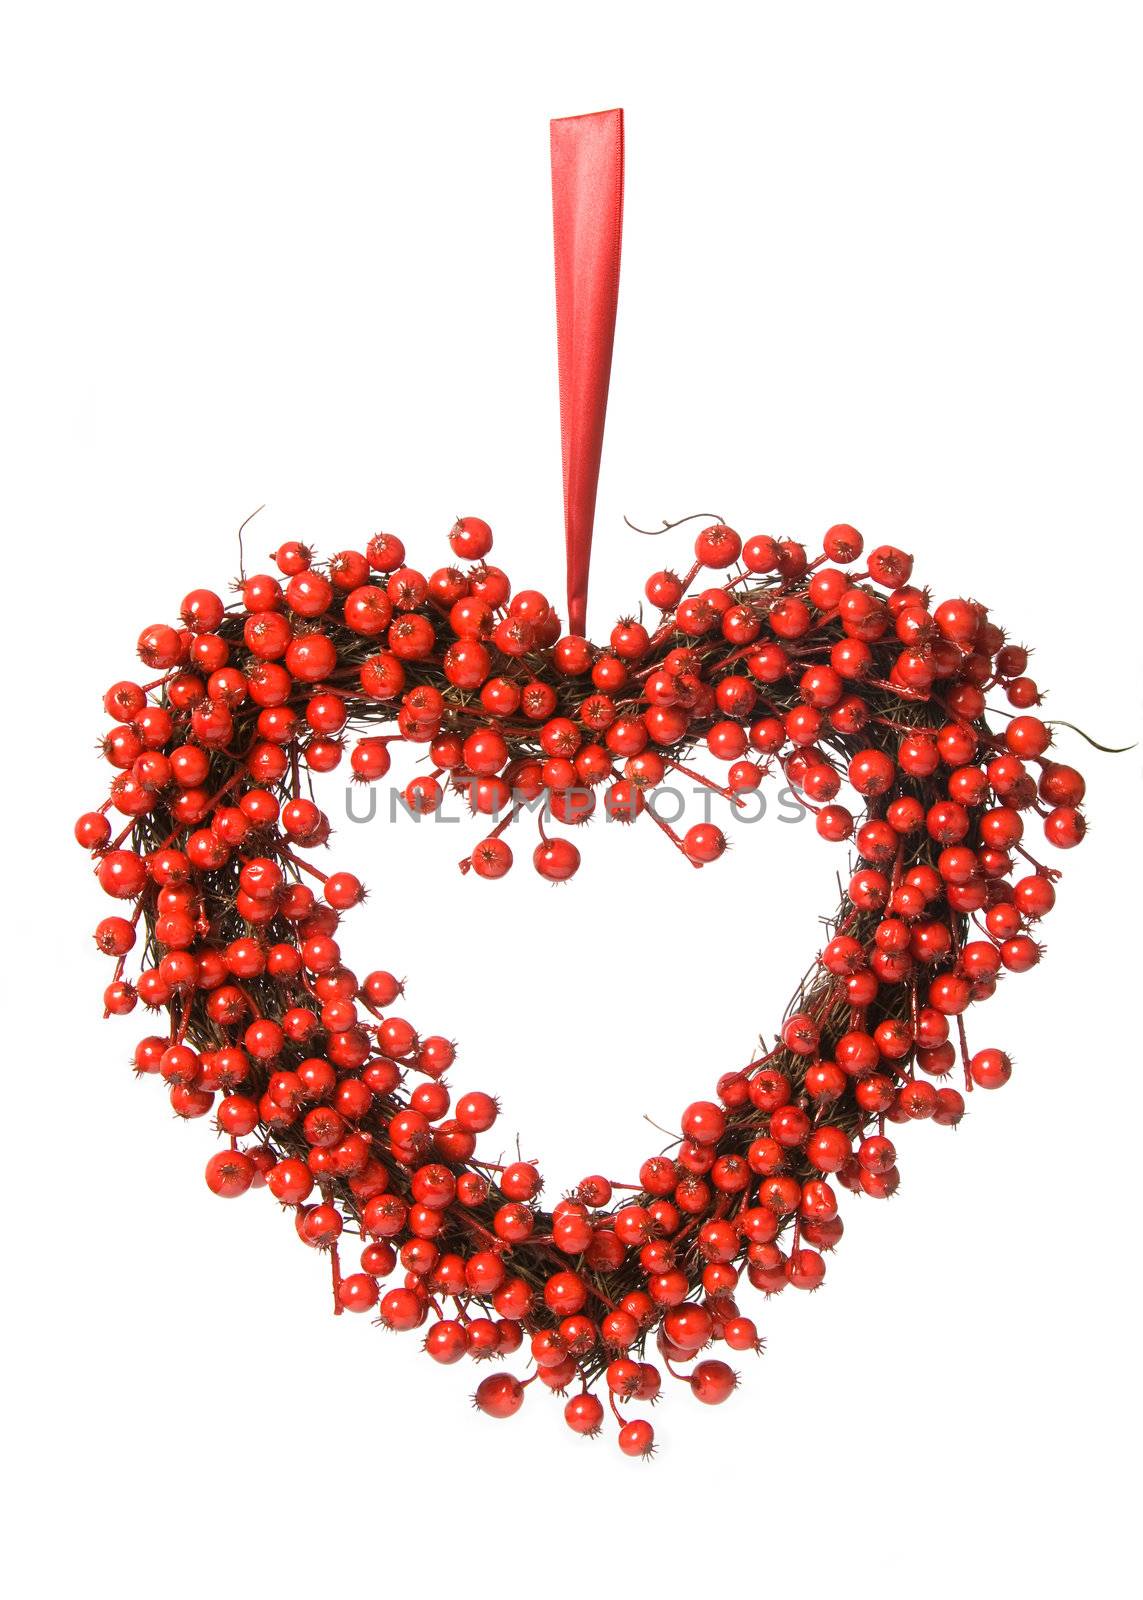 Heart-shaped red berry wreath against white